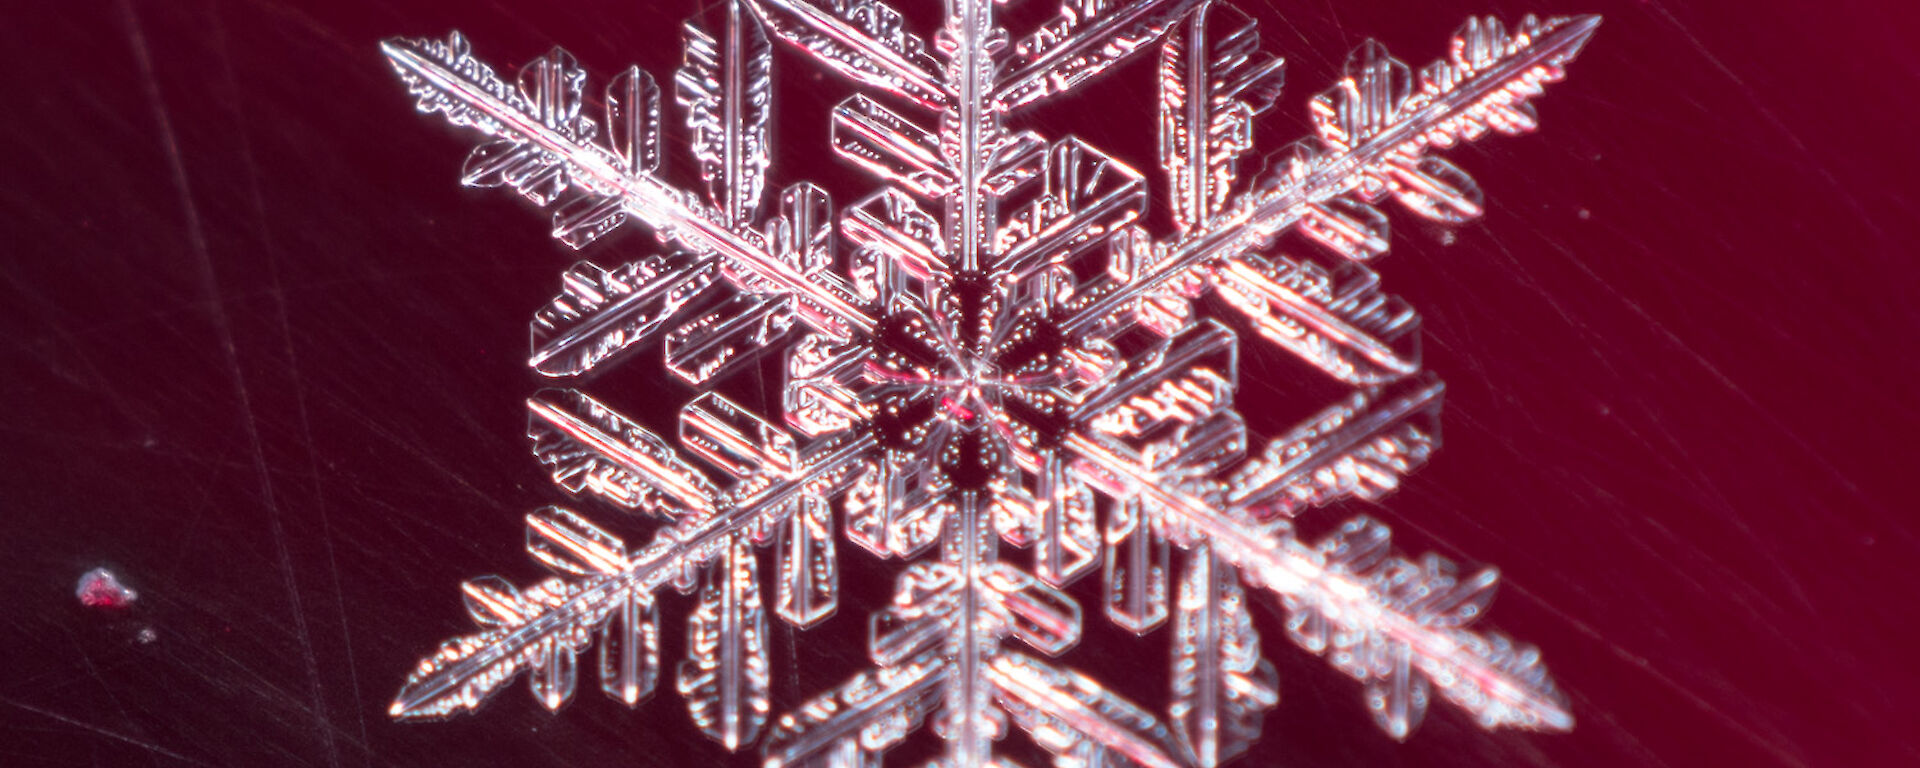 A close up of a snowflake on dark red background, shape is six pointed star